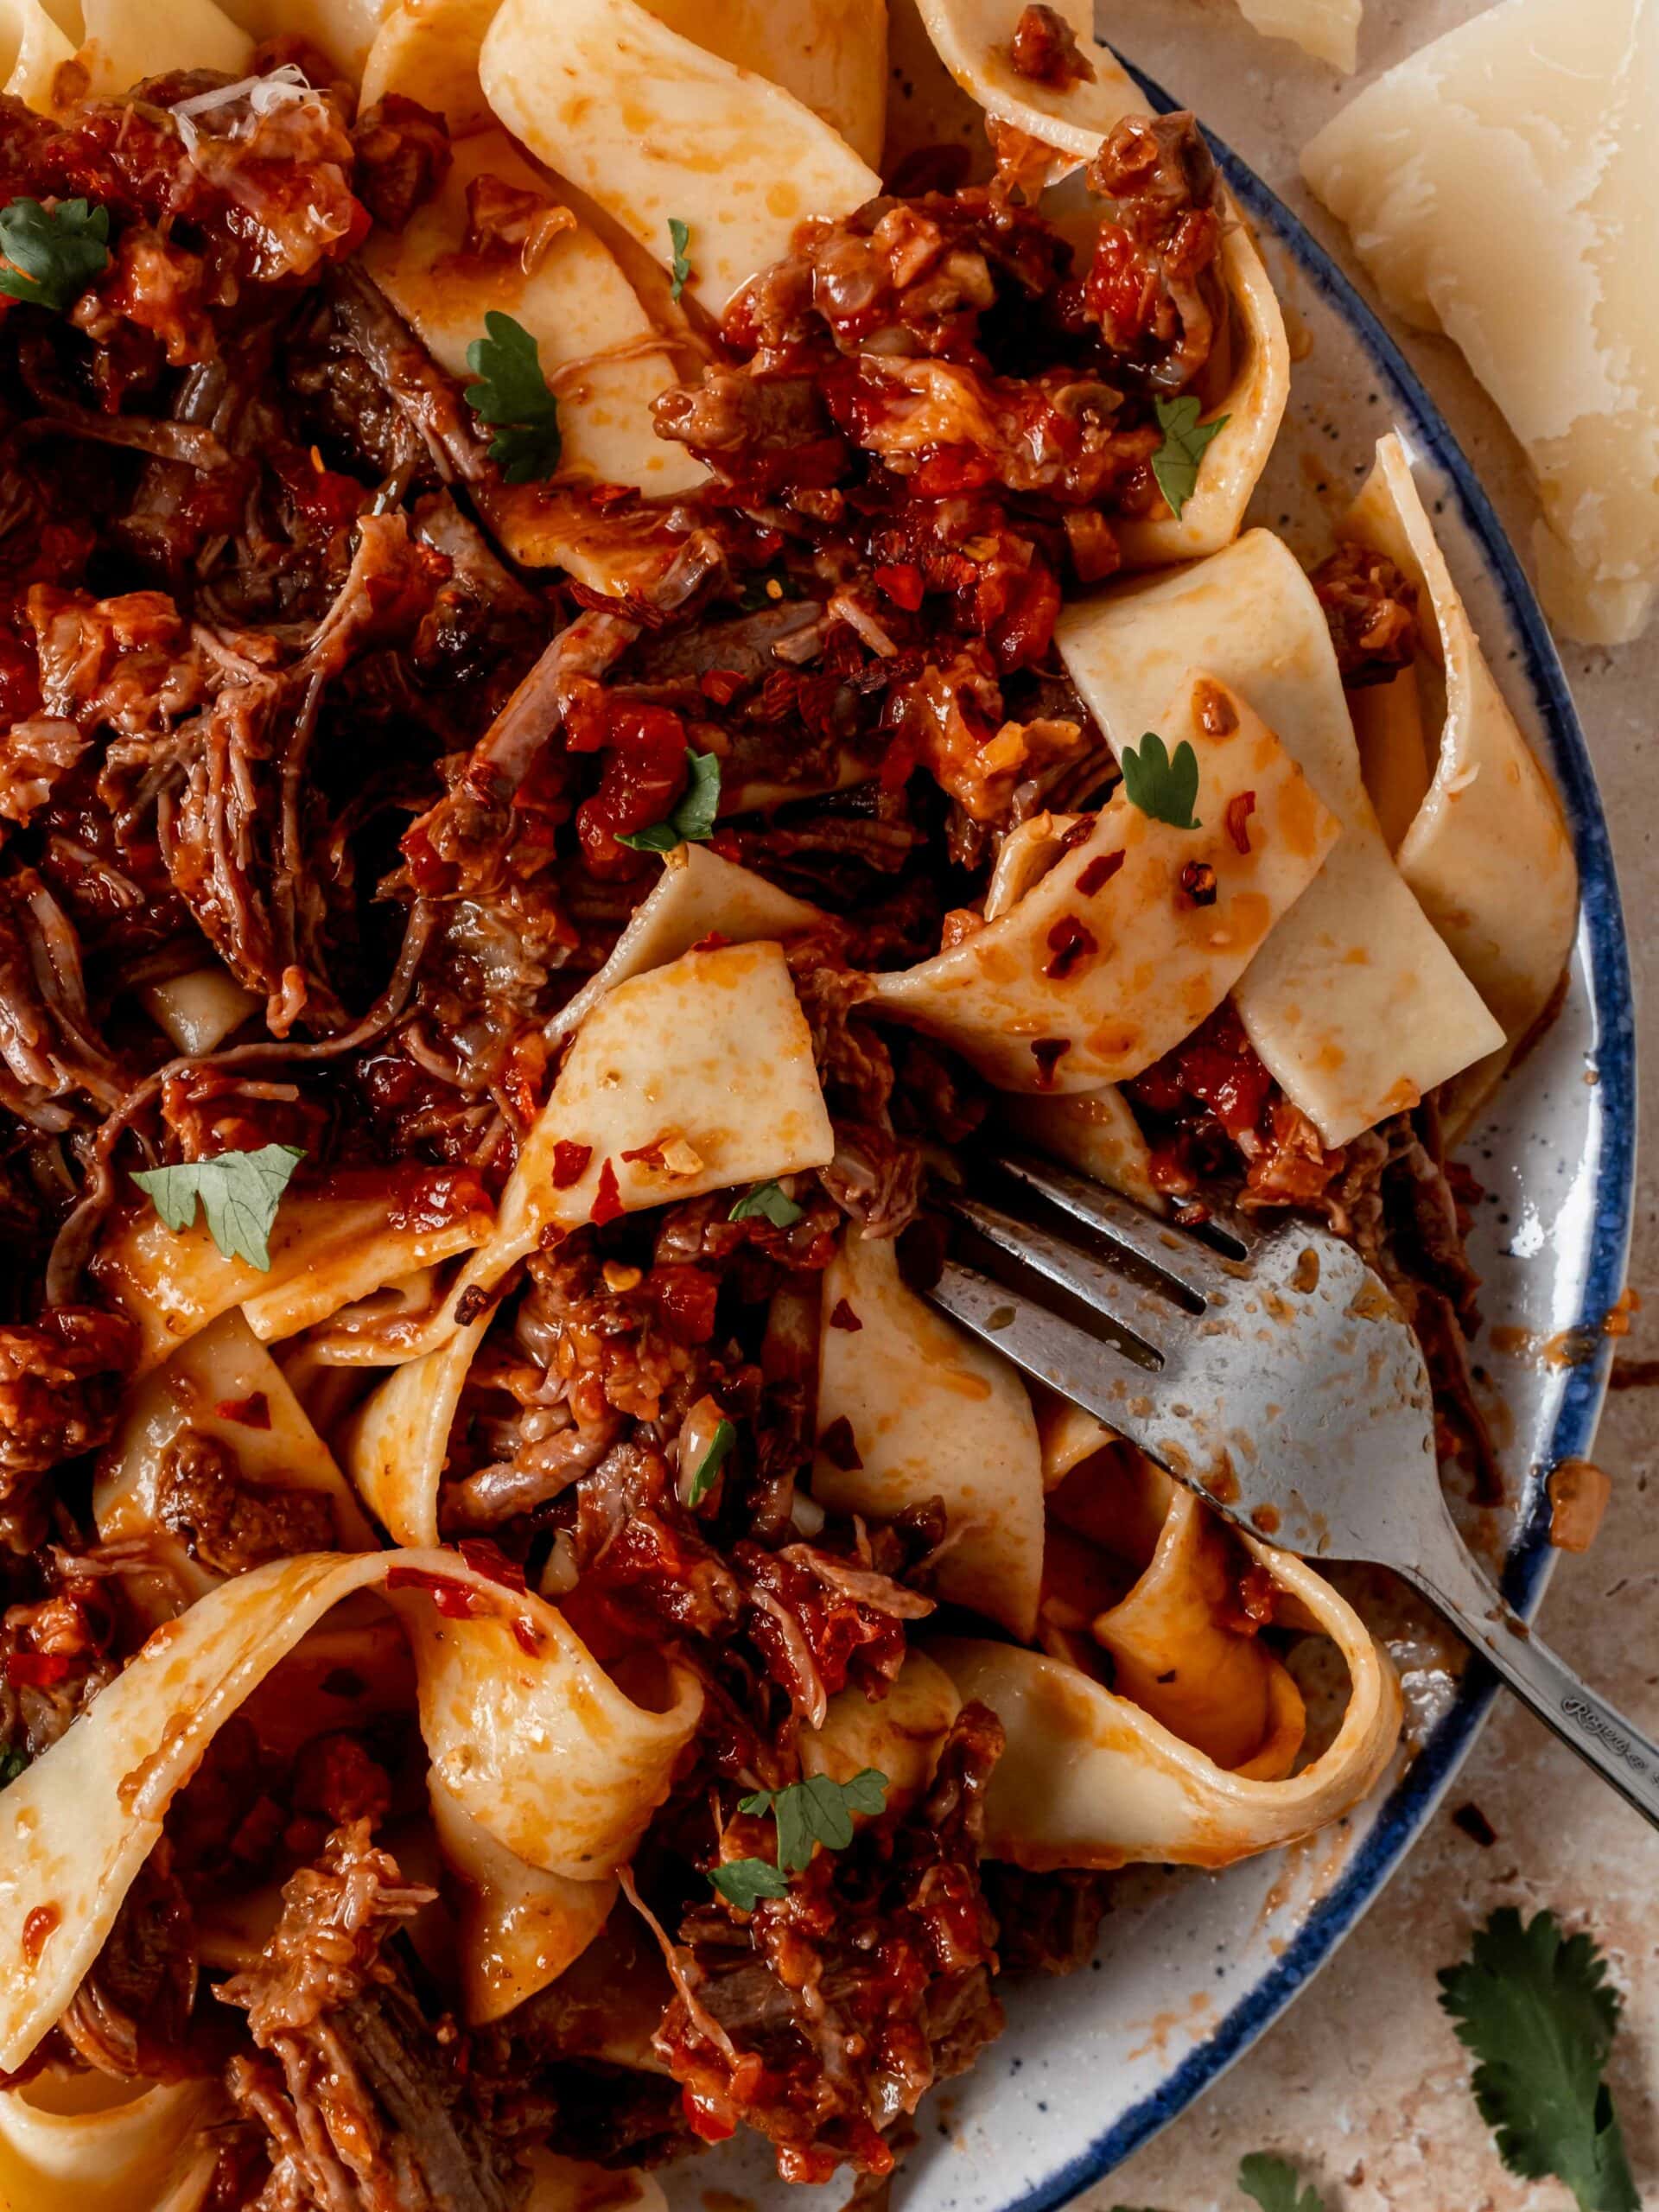 Short rib ragu over pappardelle noodles with parmesan and red pepper flakes.